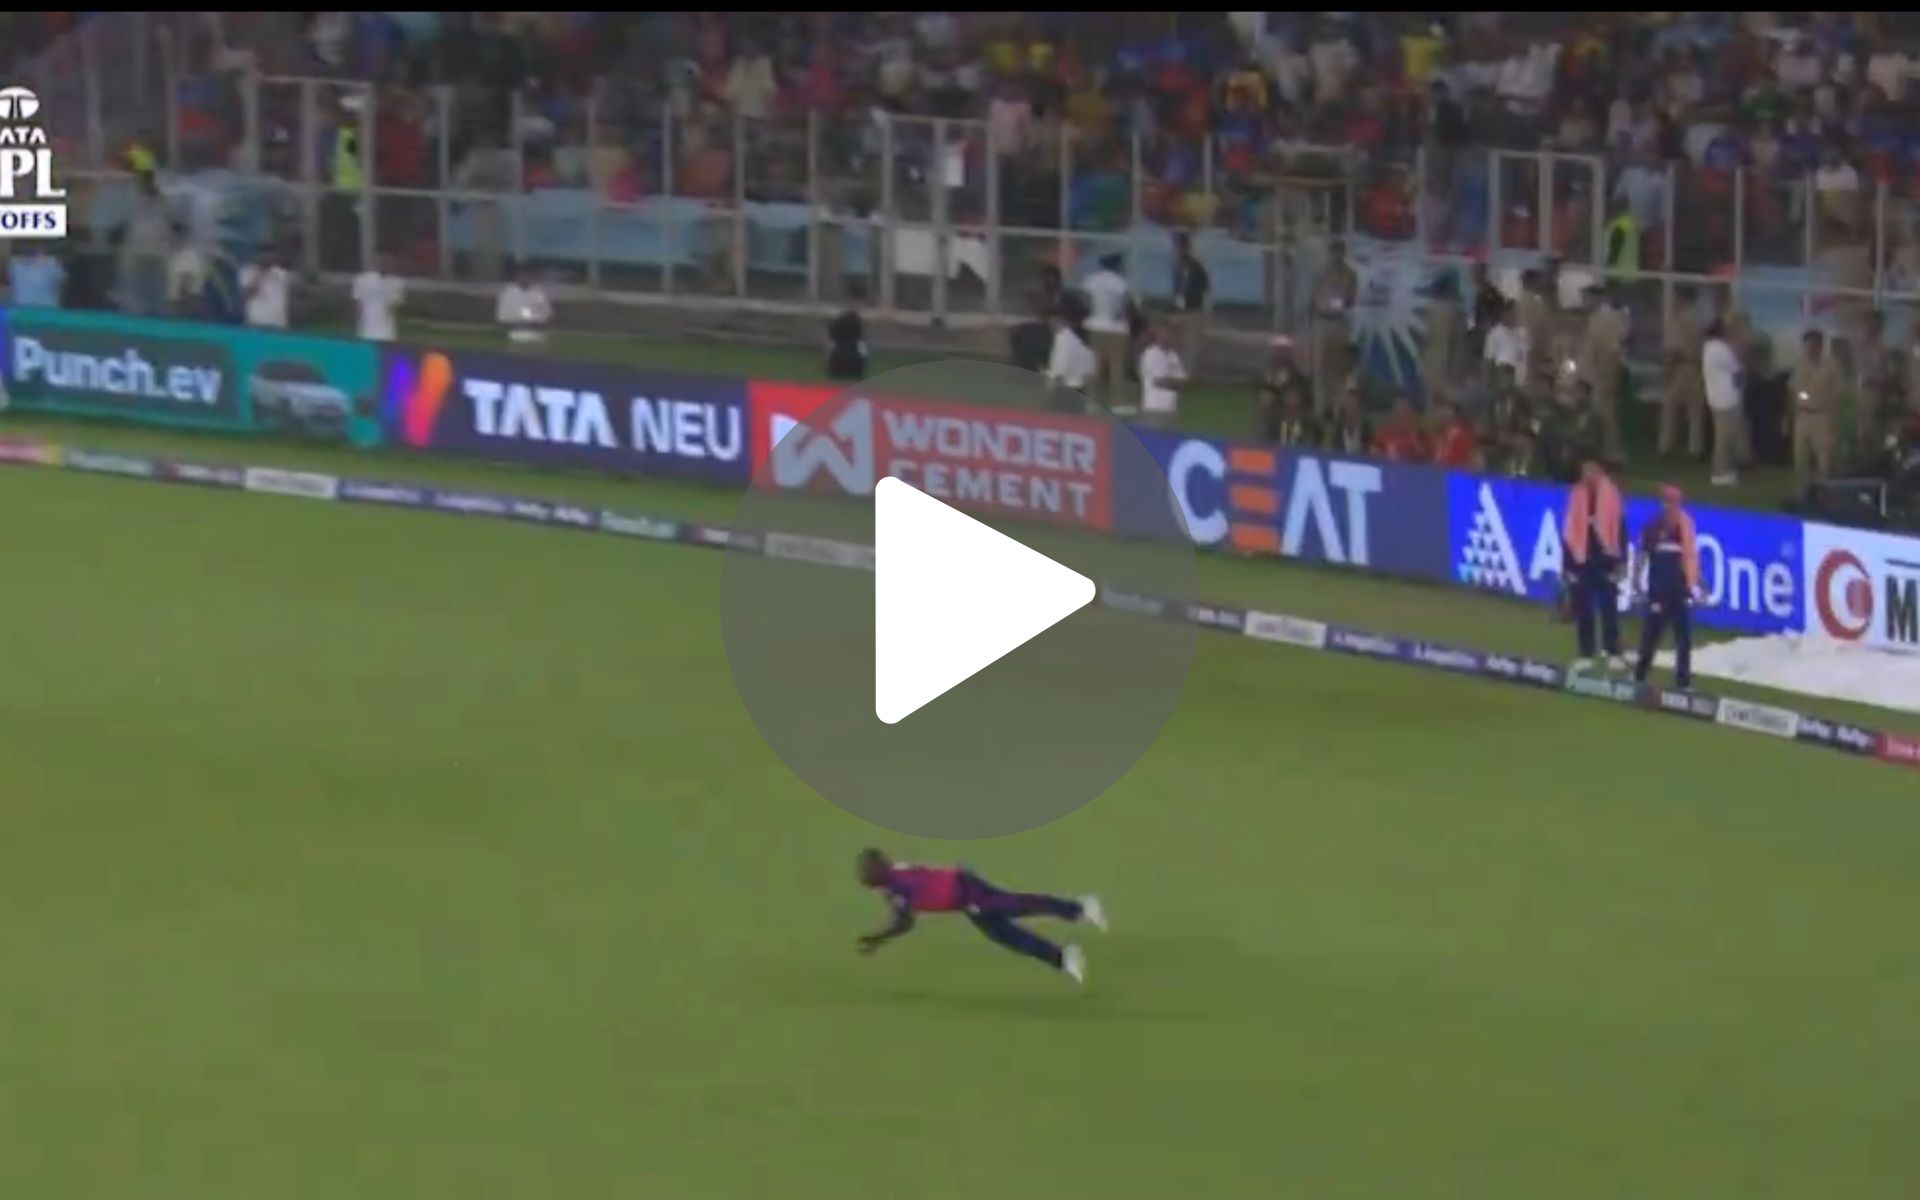 [Watch] Superman In Attendance! Powell Turns Into A Bird As RCB Lose Captain Faf Early In Ahmedabad